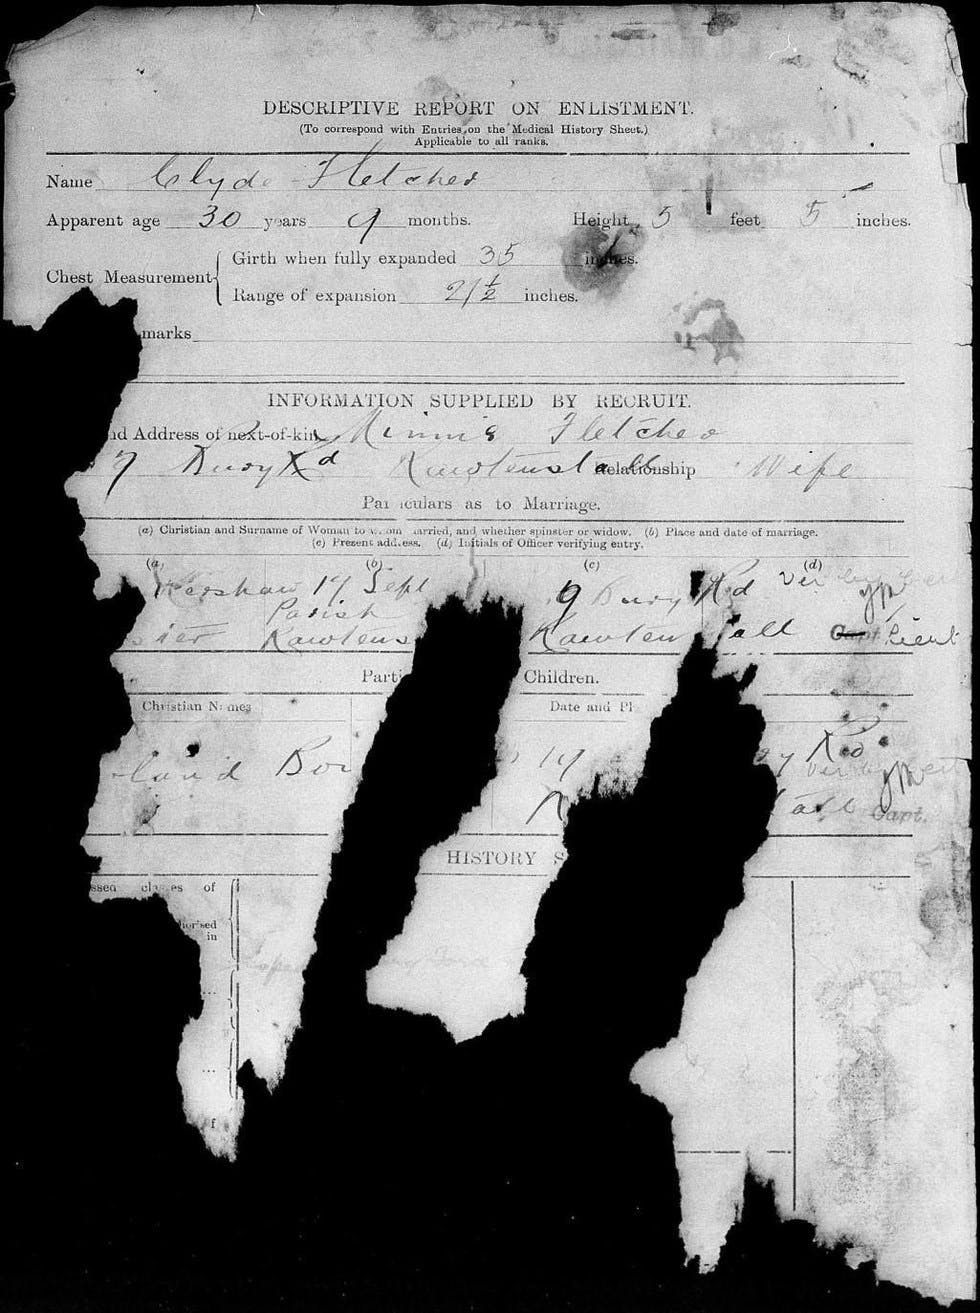 Partially torn page of a soldier's enlistment obscuring the names of his wife and child or children,British Army Service Records, http://findmypast.com, subscription database, accessed June 2017.